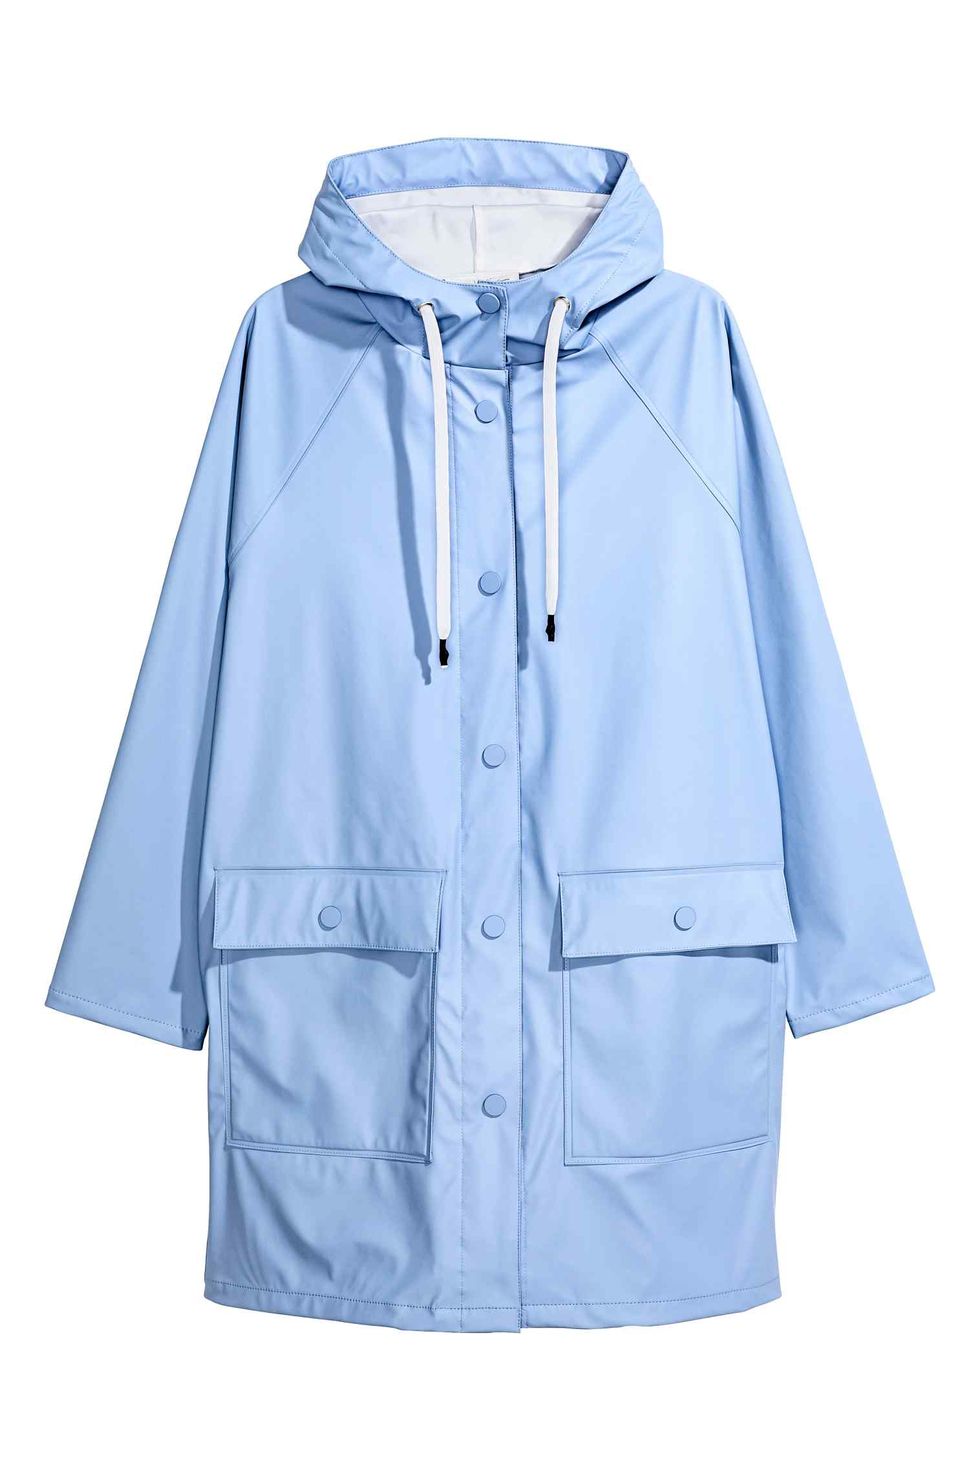 Blue, Product, Sleeve, Collar, Textile, Outerwear, White, Electric blue, Jacket, Fashion, 